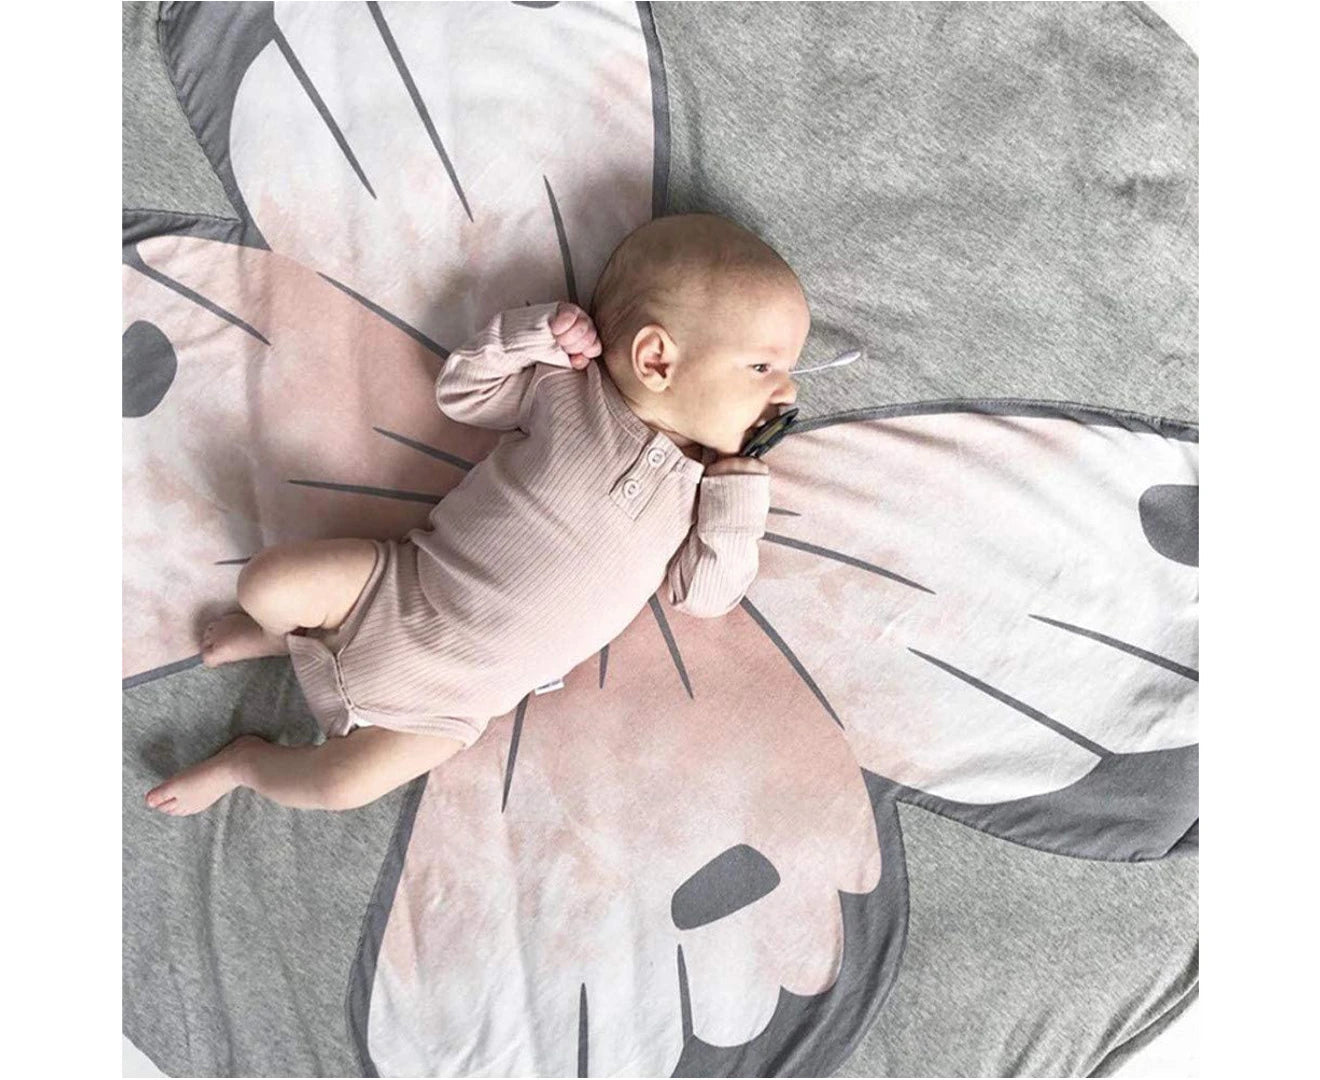 Butterfly Baby Play Mat Round Play Mat Baby Stork 